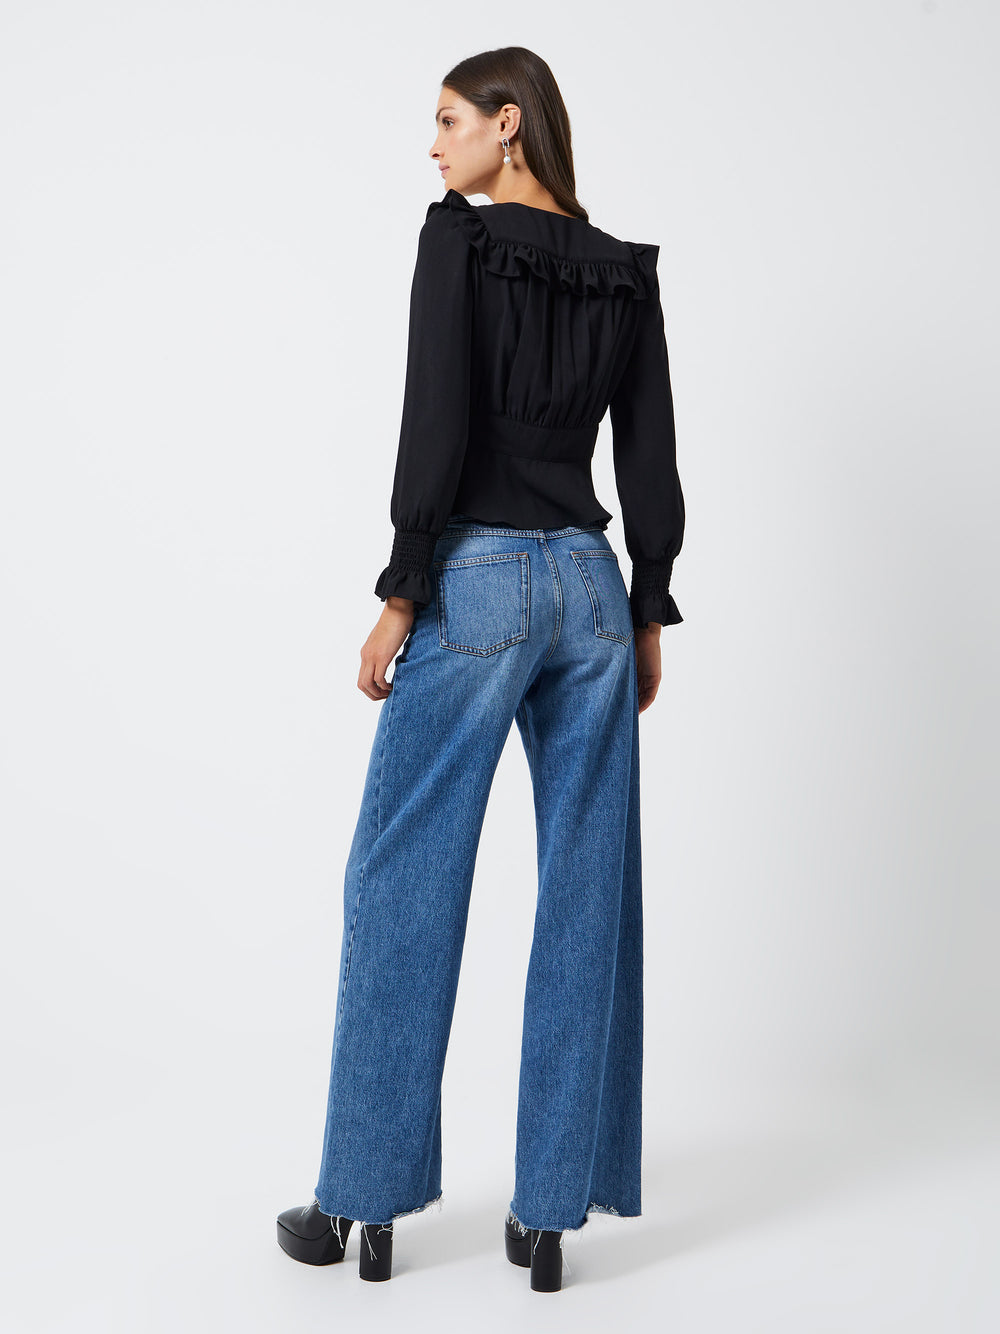 Etrya Colette Crepe Embroidered Top Black | French Connection UK